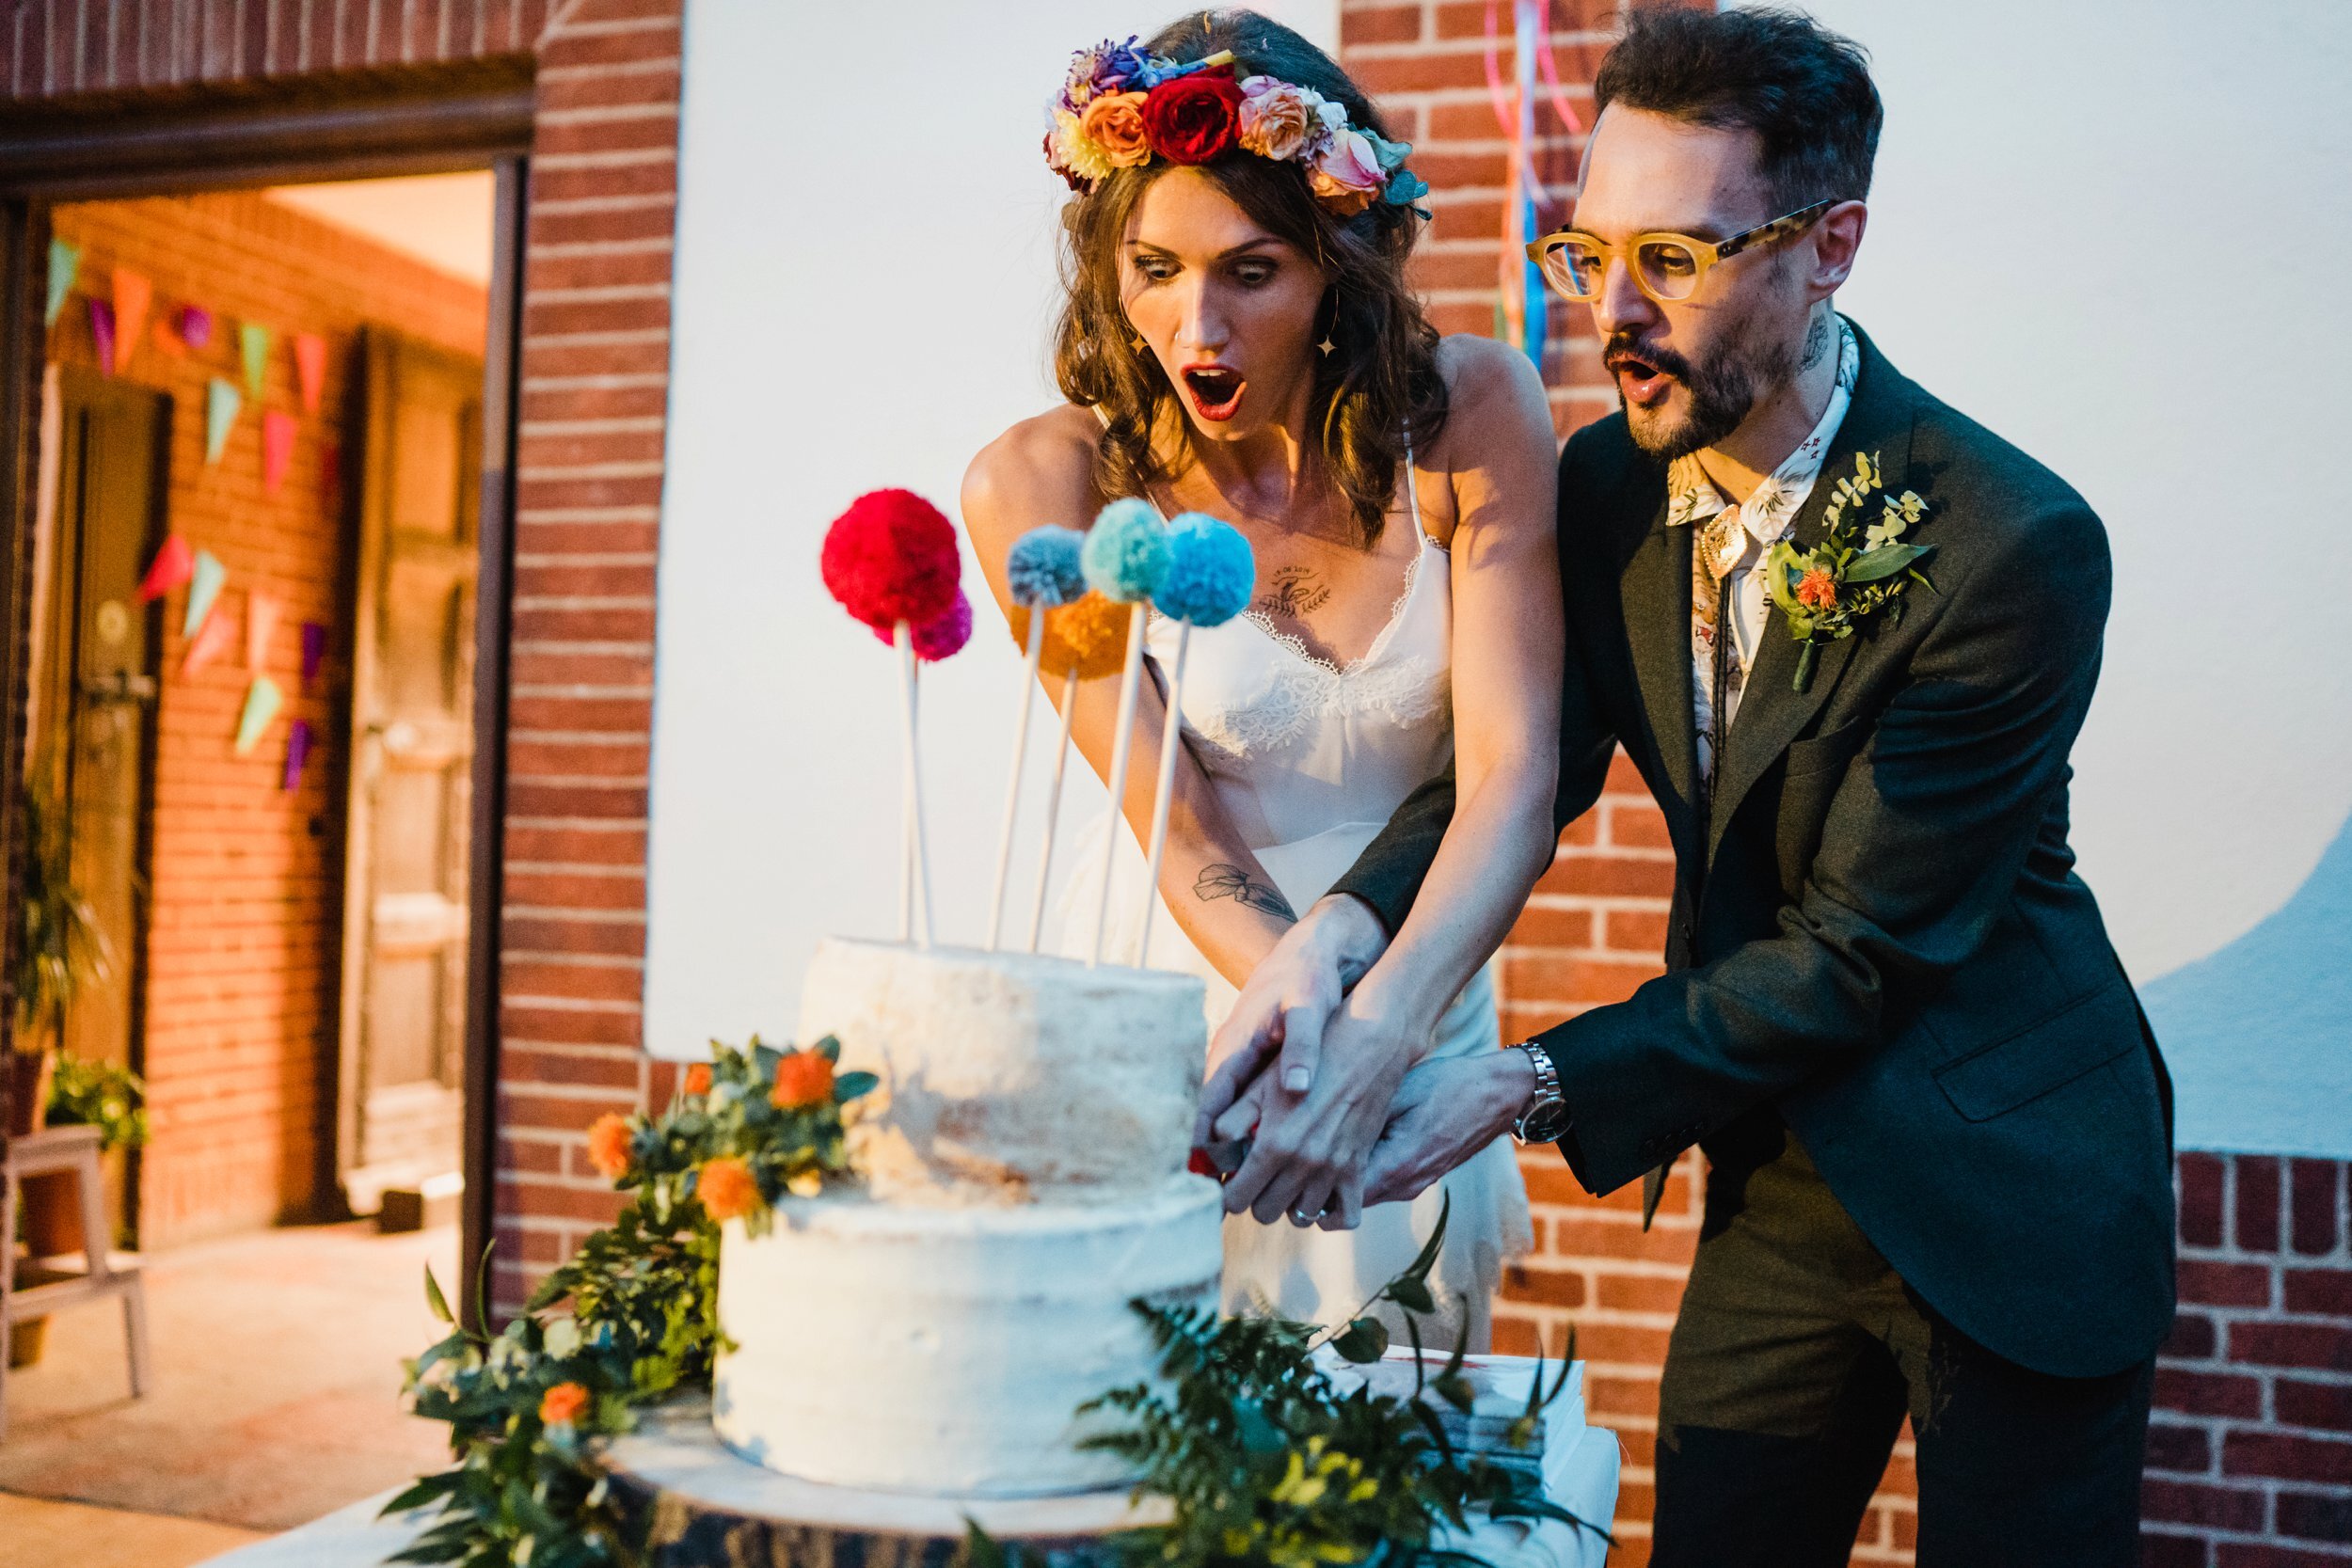 cutting of the cake goes wrong at a wedding